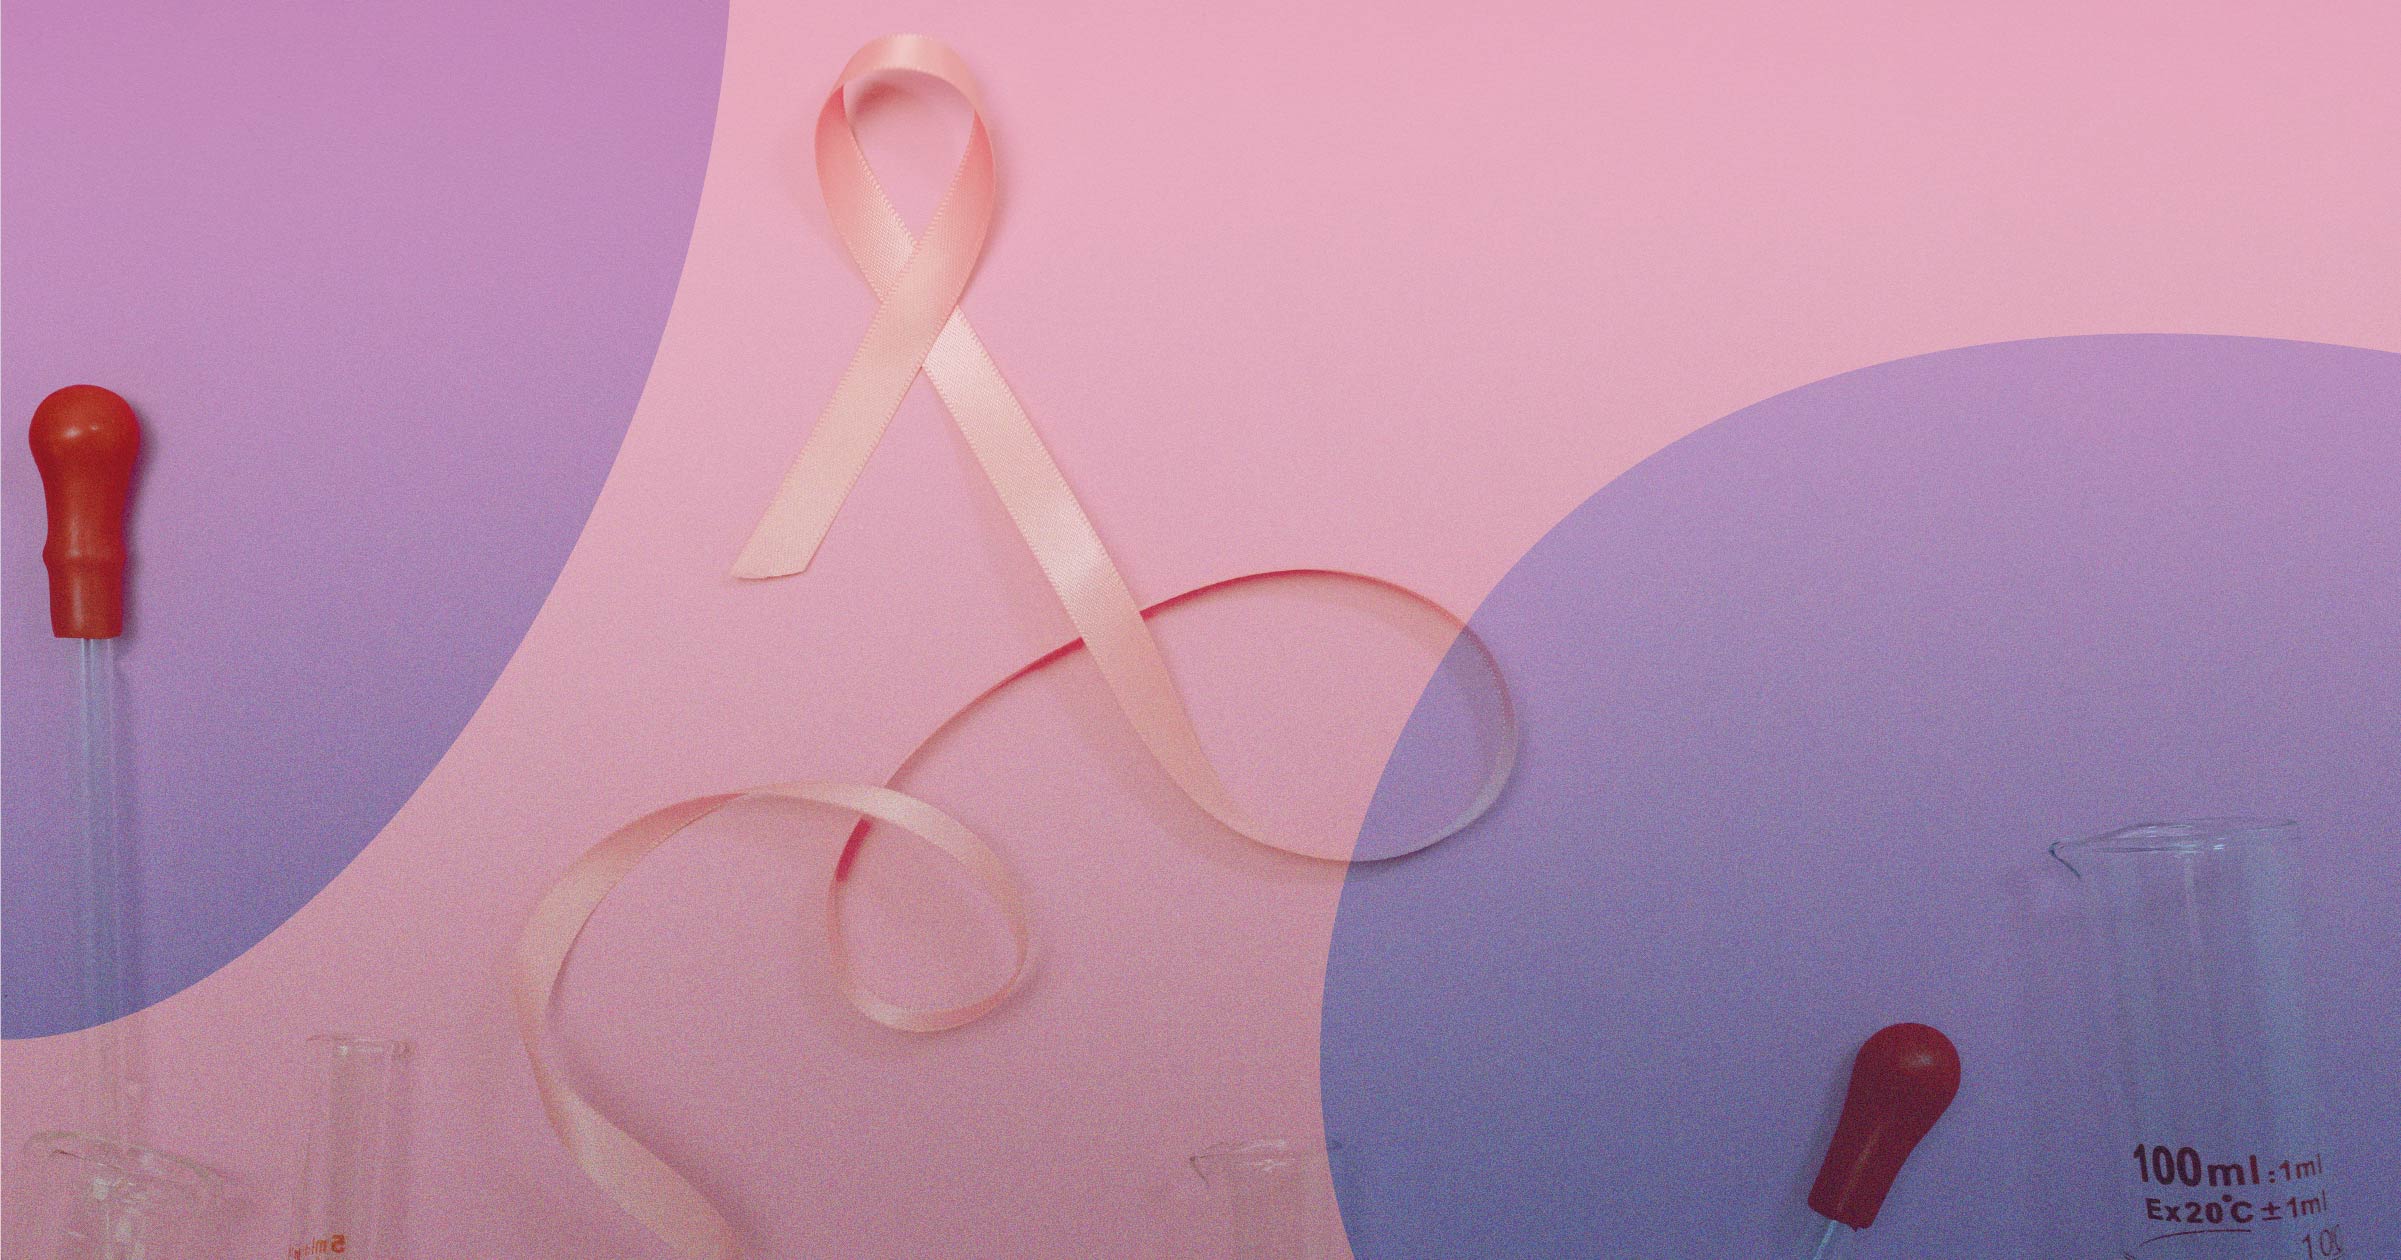 Breast Cancer ribbon surrounded by scientific equipment